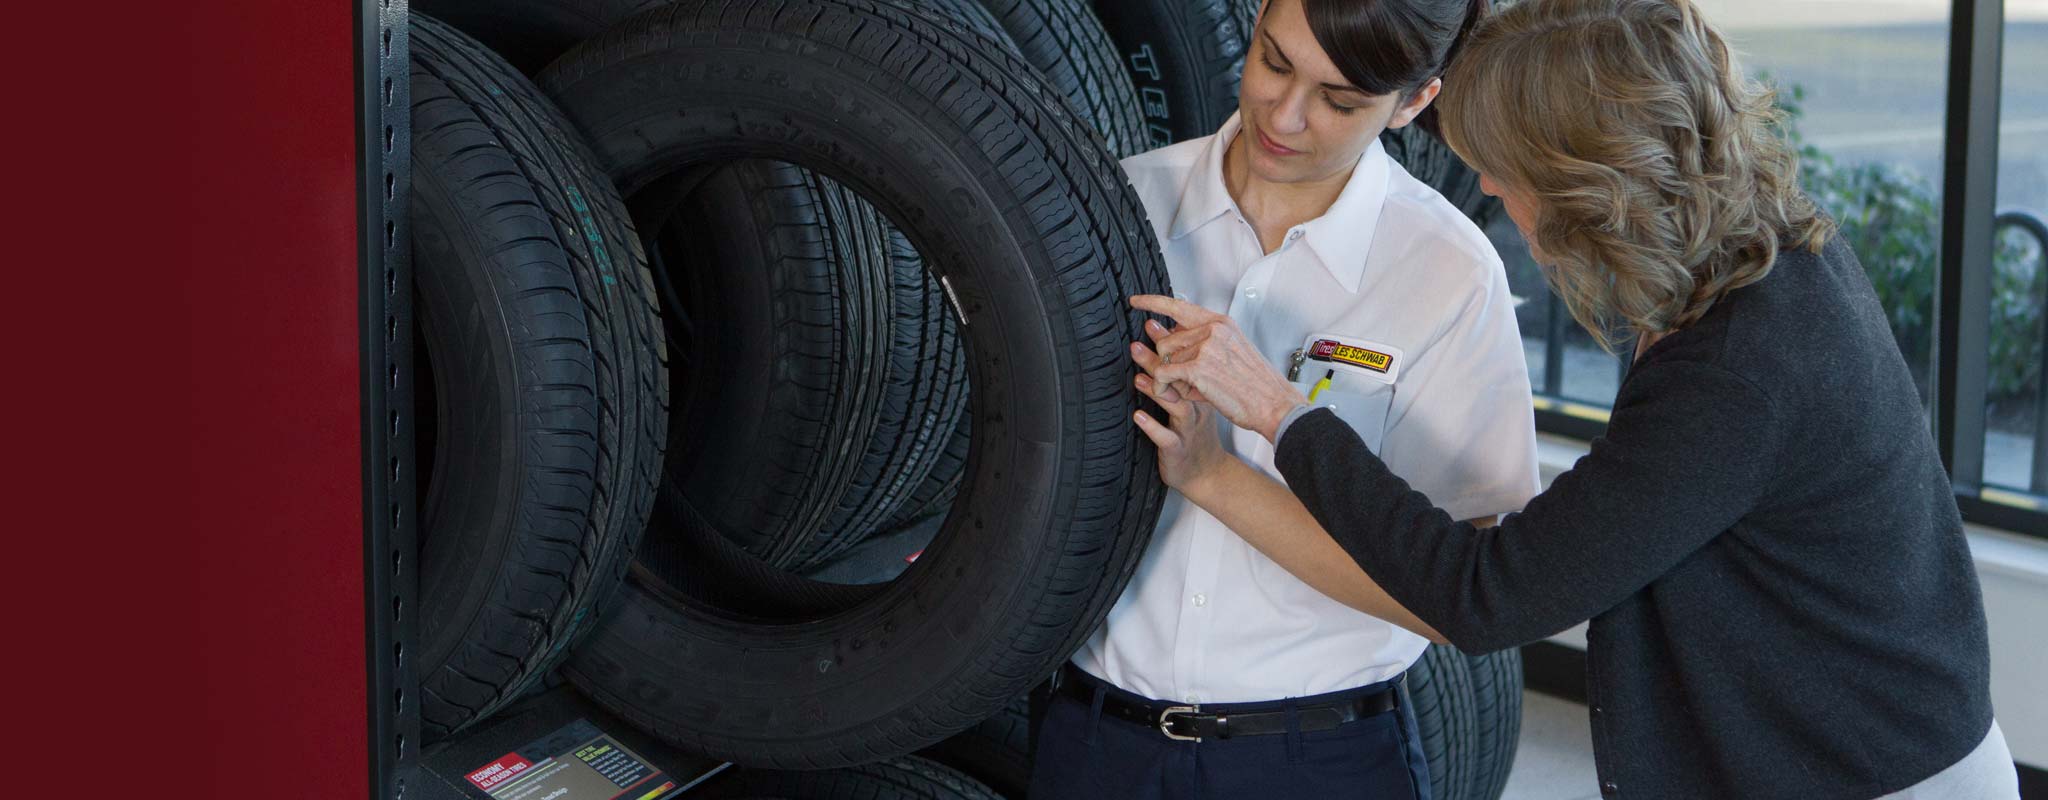 A Helpful Q&A Guide to Buying Tires - Les Schwab